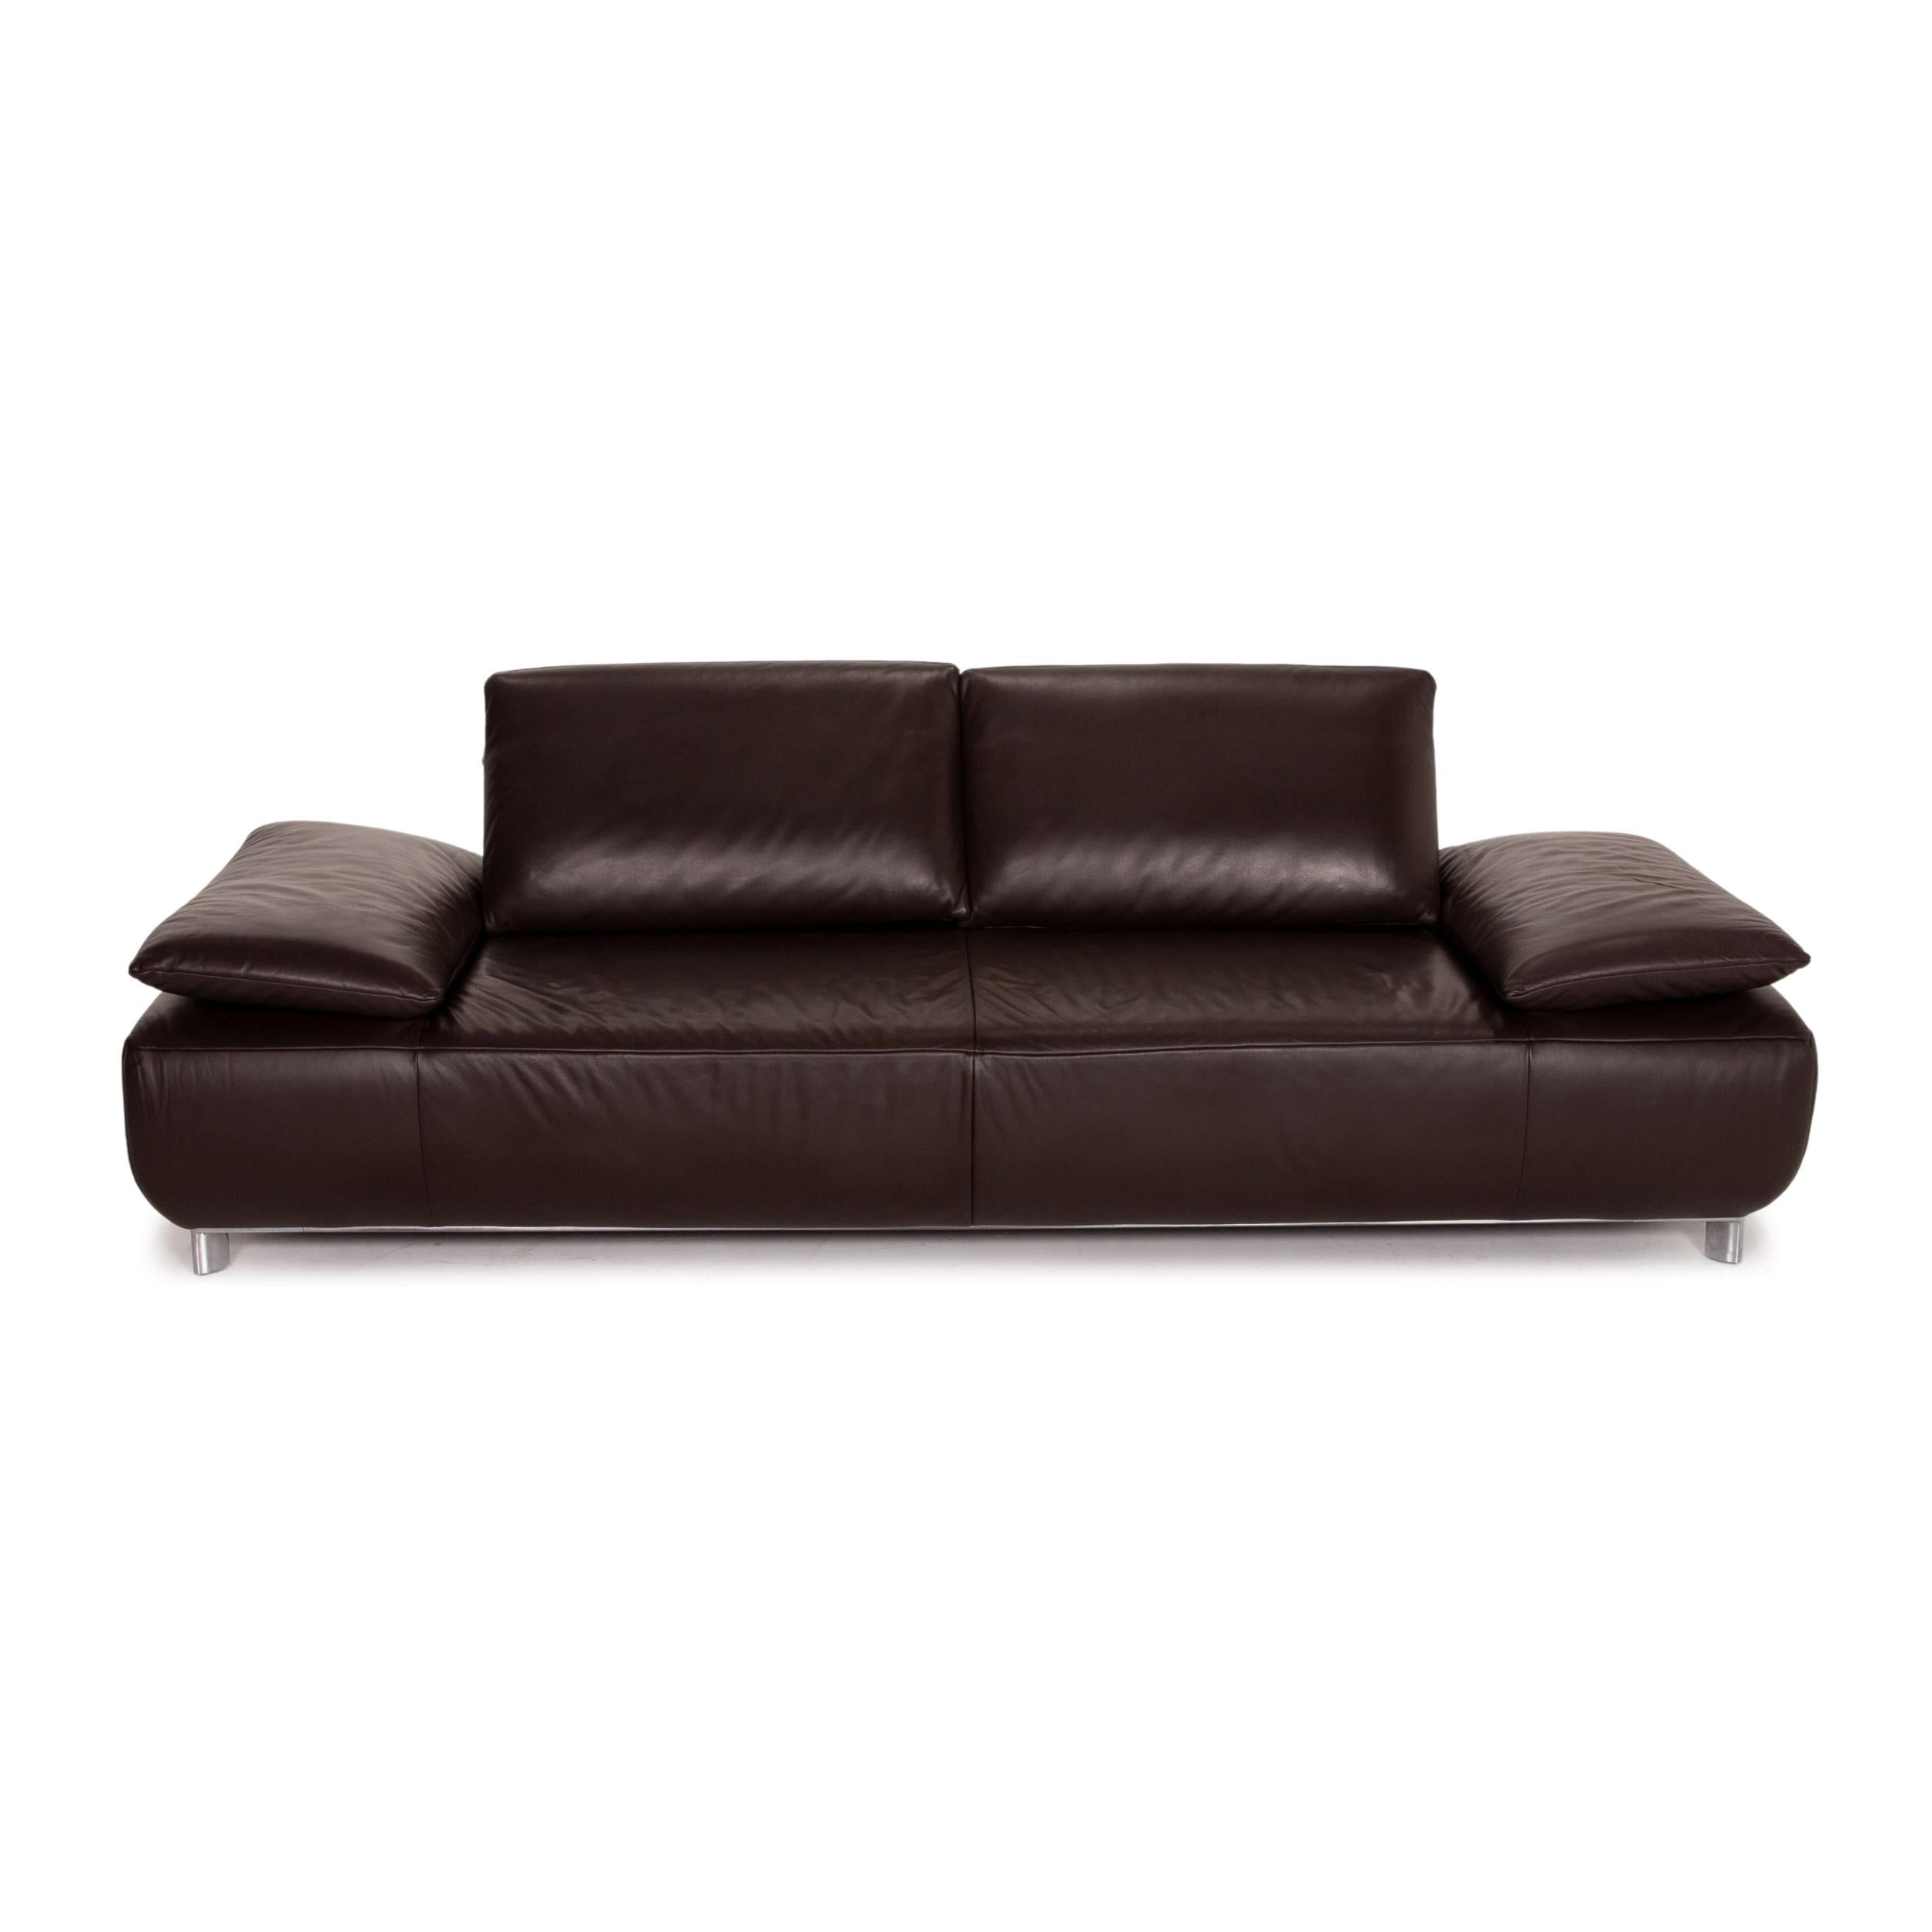 Koinor Volare Leather Sofa Brown Dark Brown Three-Seat Function Couch For Sale 2